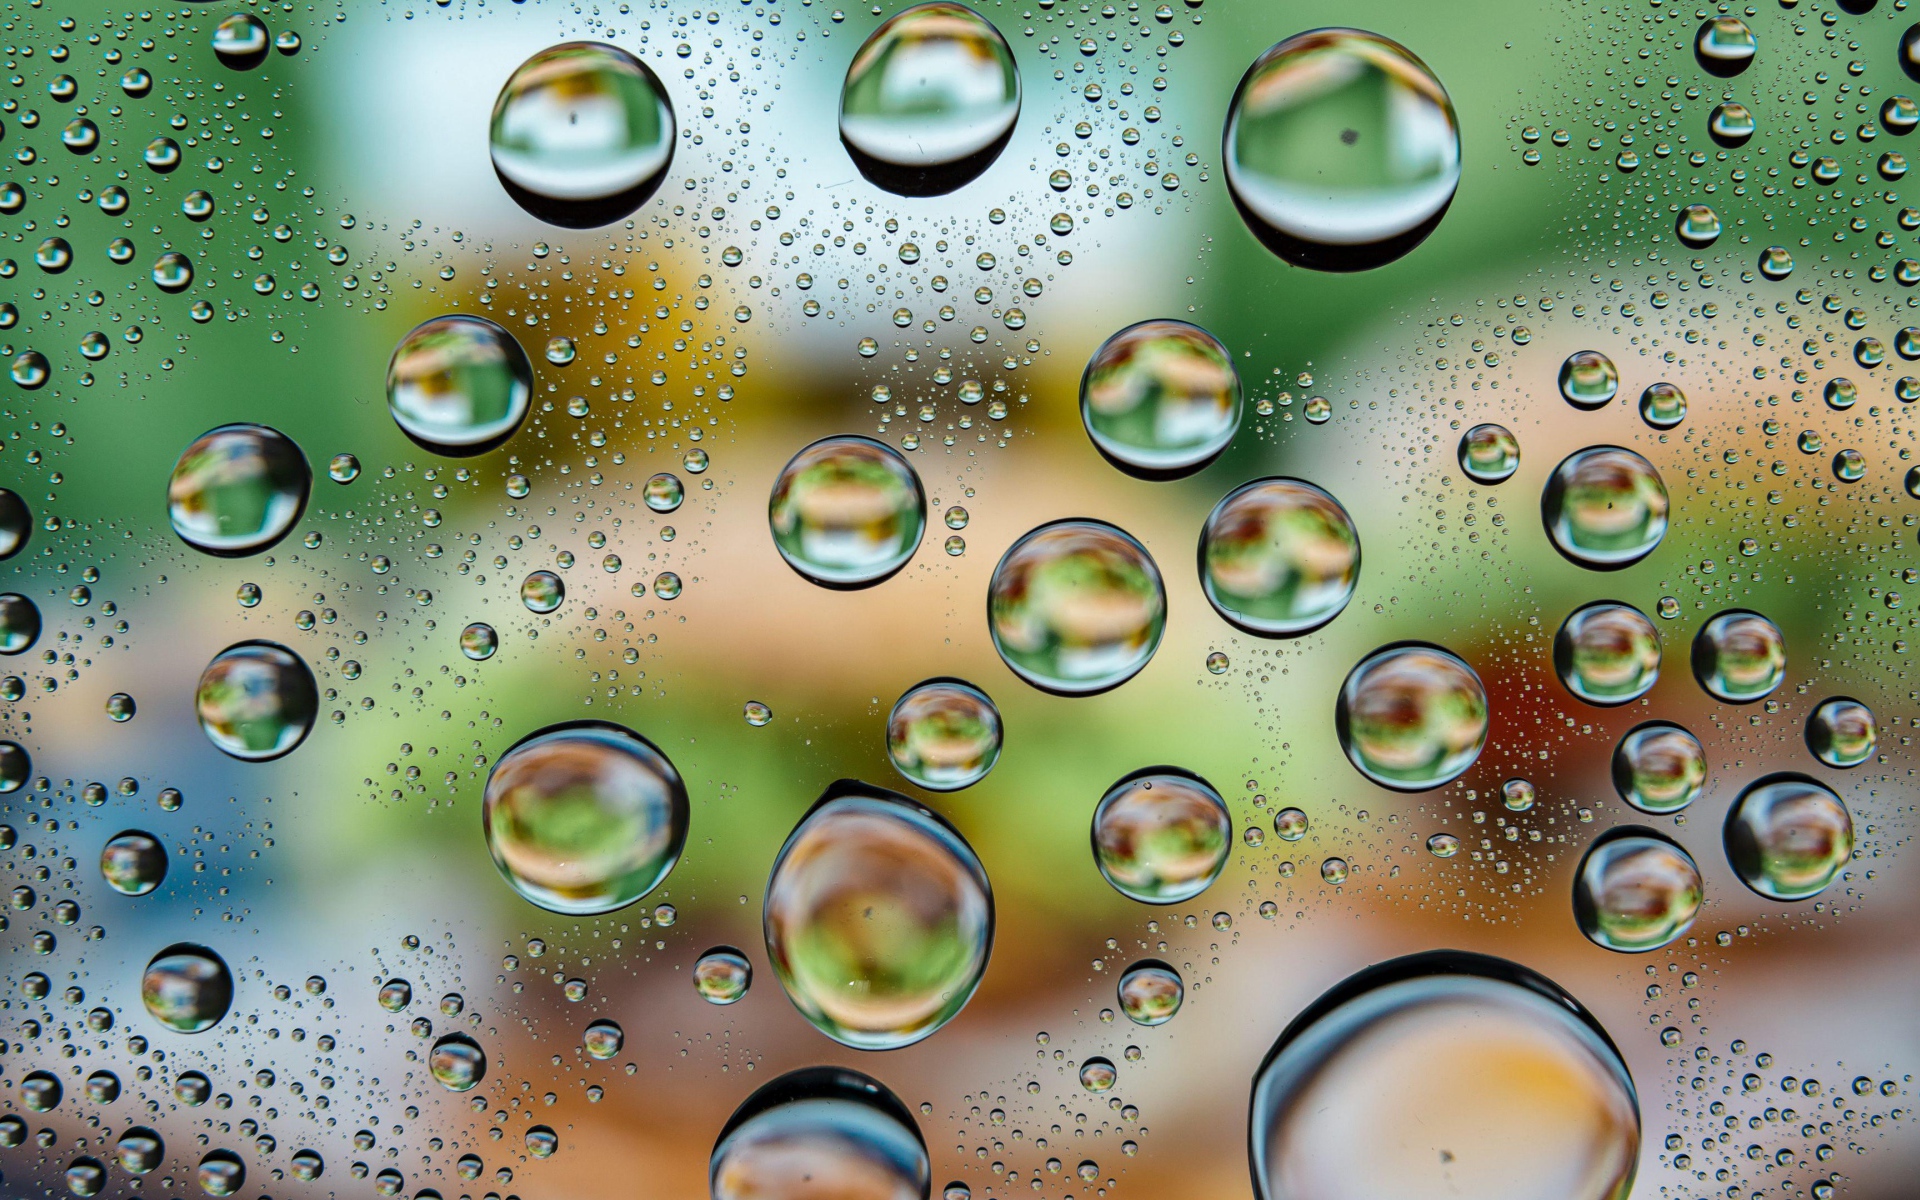 Big bubbles of water on glass